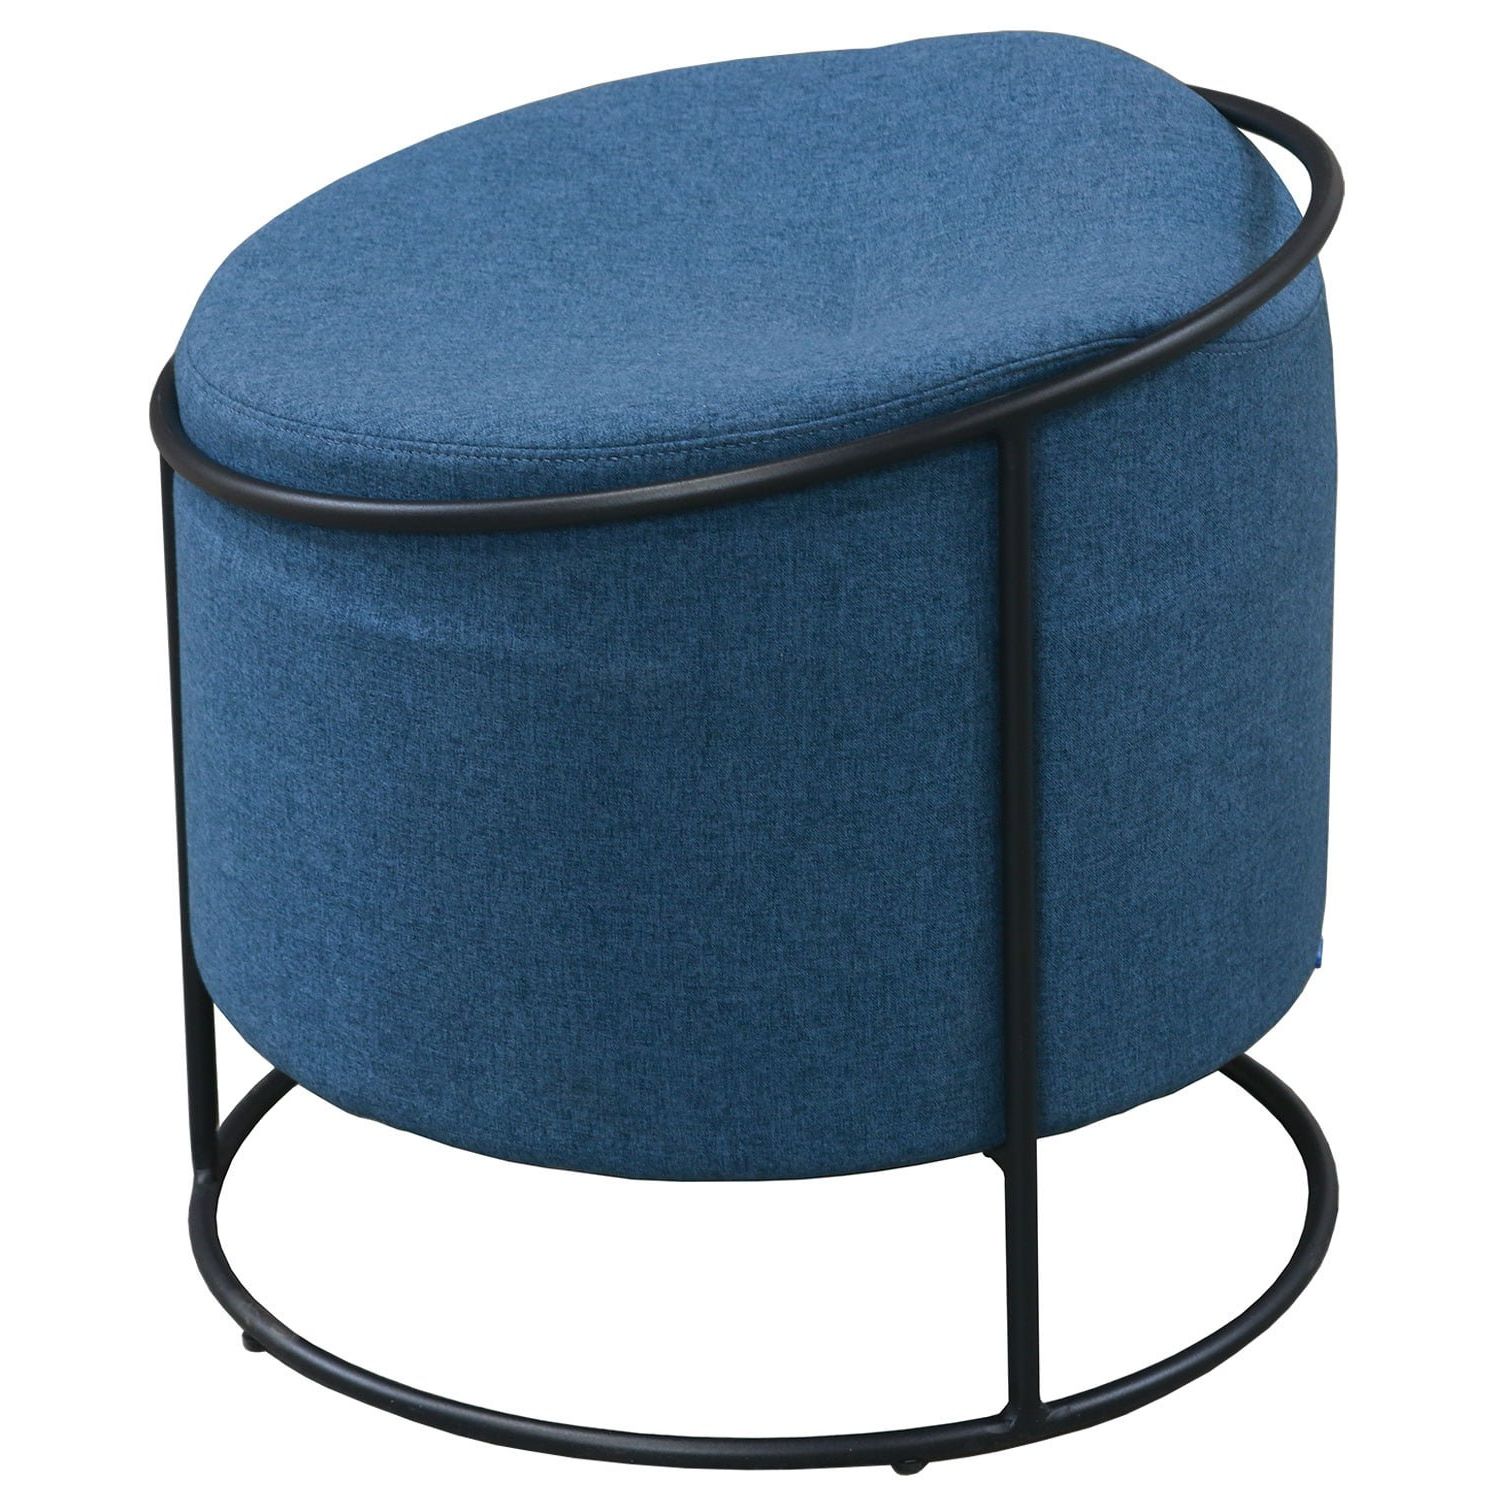 Current Curved Modern Ottoman Seating, Dark Blue – National Office Interiors Regarding Blue Slate Jute Pouf Ottomans (View 7 of 10)